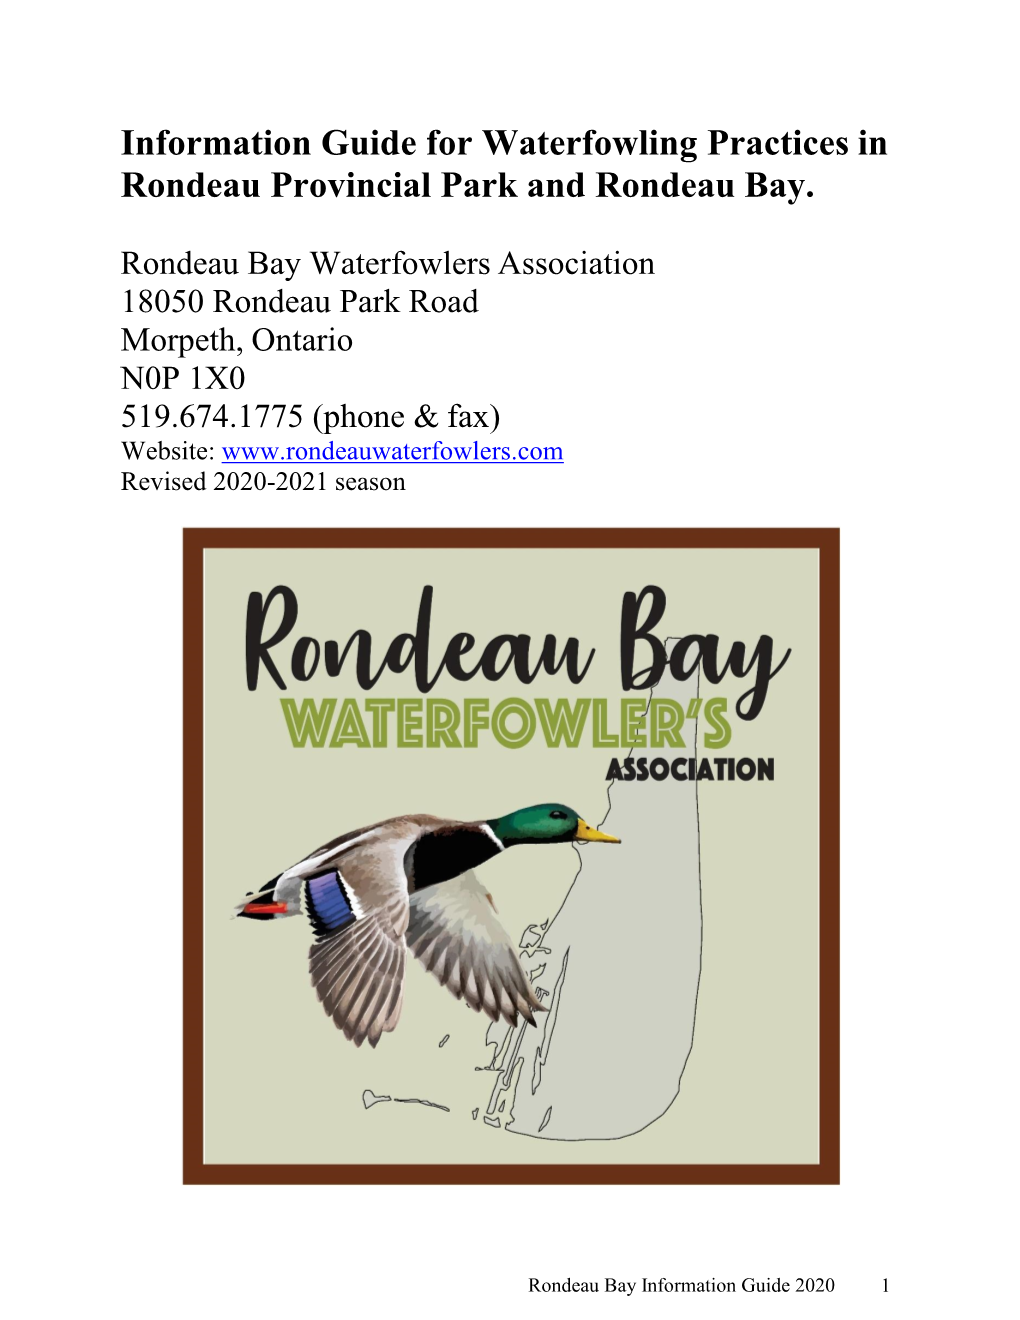 Information Guide for Waterfowling Practices in Rondeau Provincial Park and Rondeau Bay